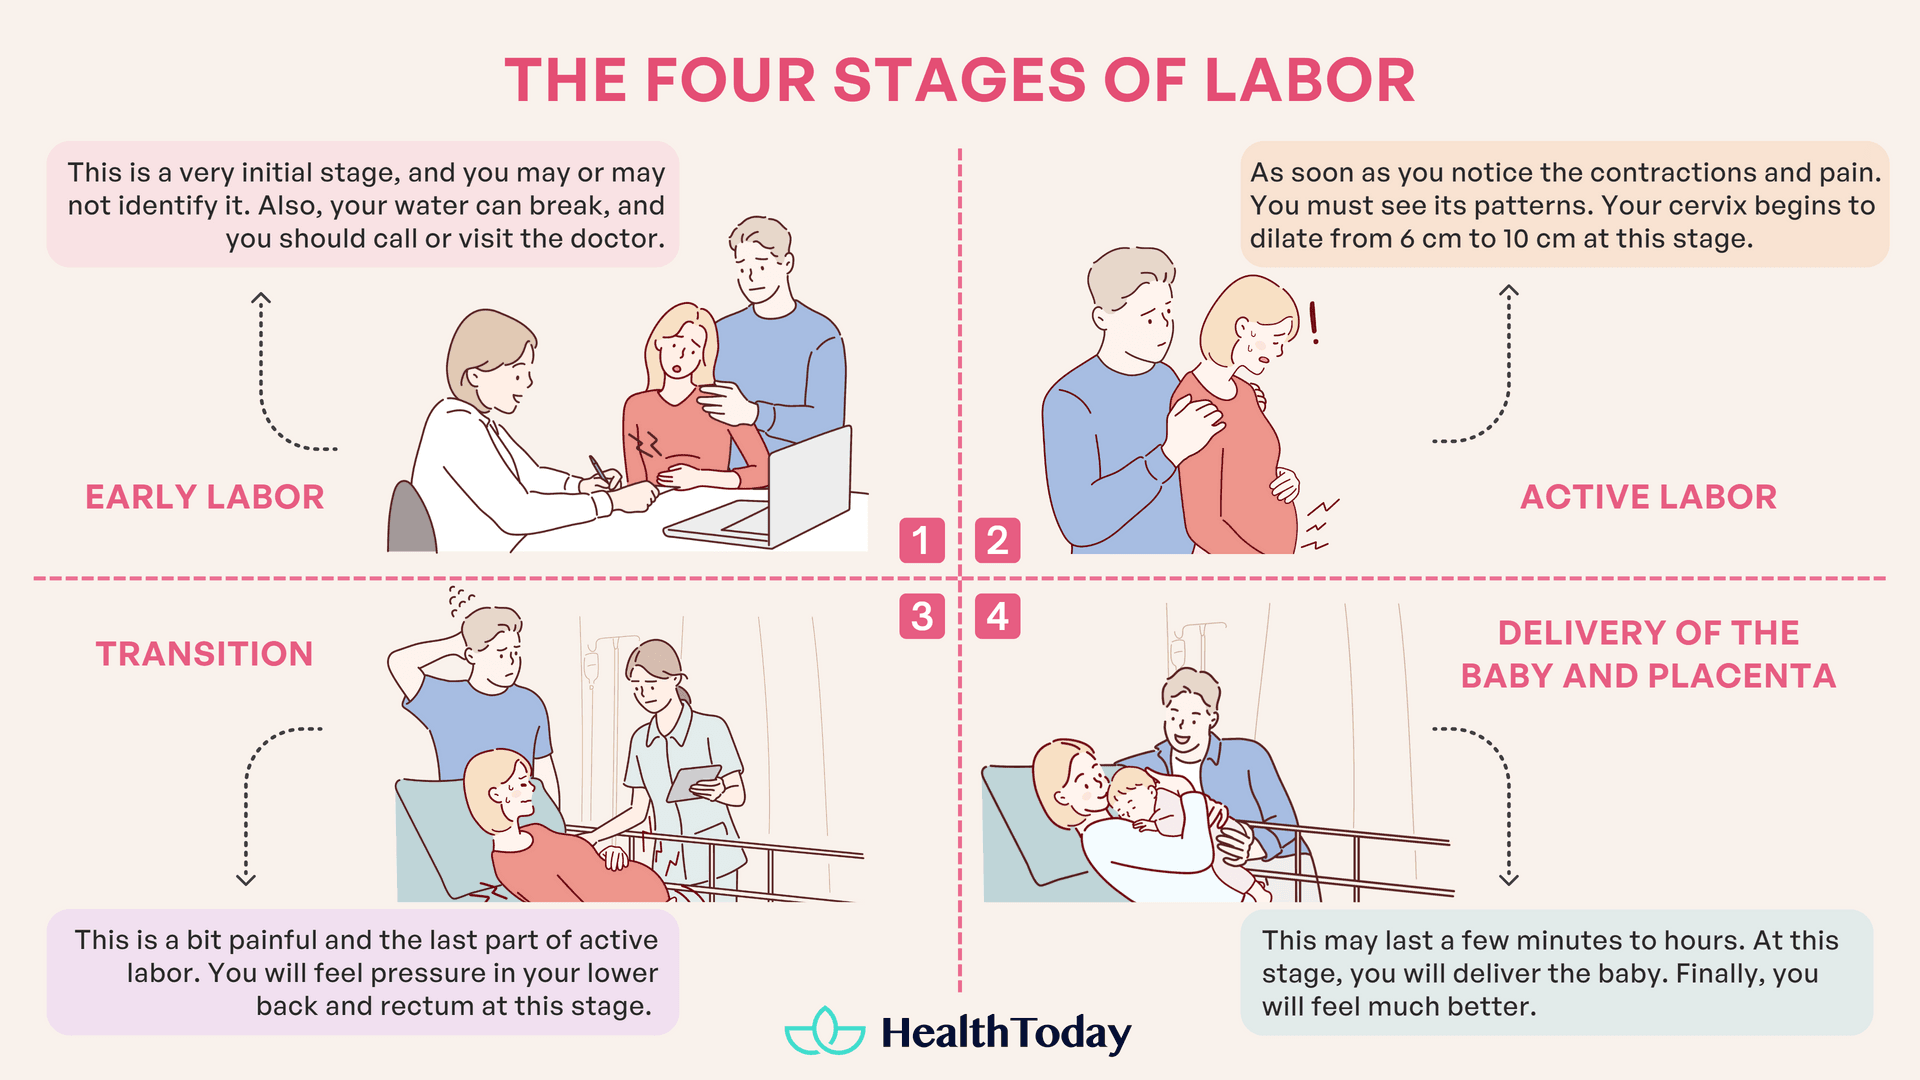 The Four Stages of Labor